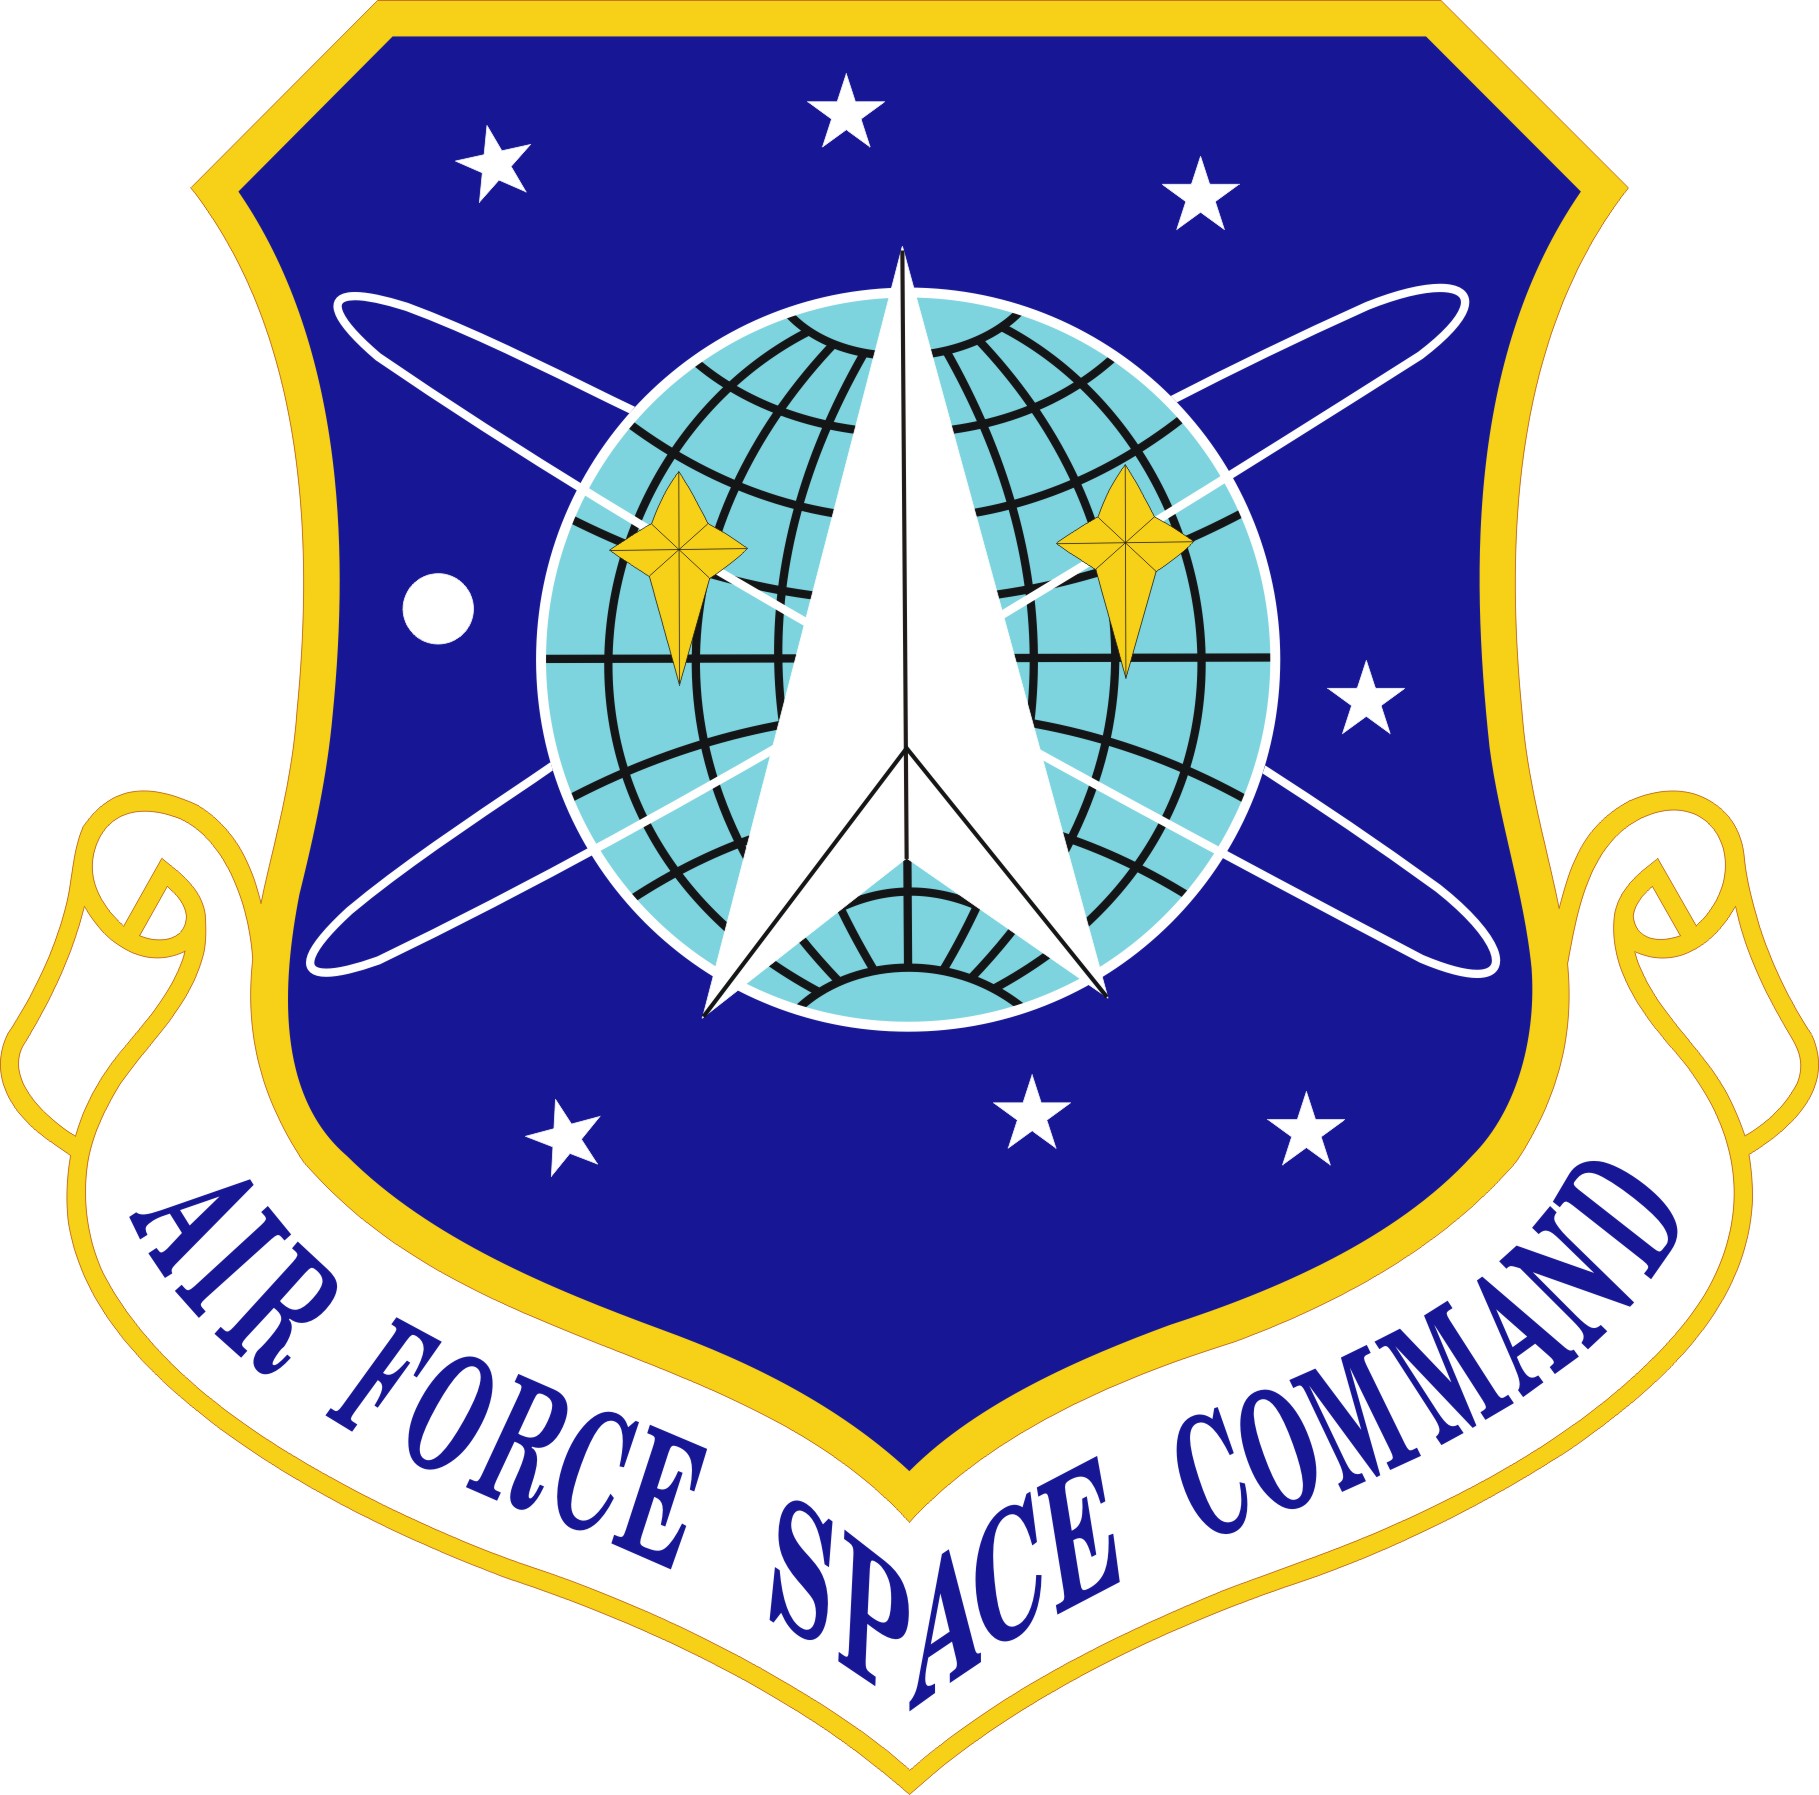 Air Force Space Command (USAF) > Air Force Historical Research Agency > Display1819 x 1795